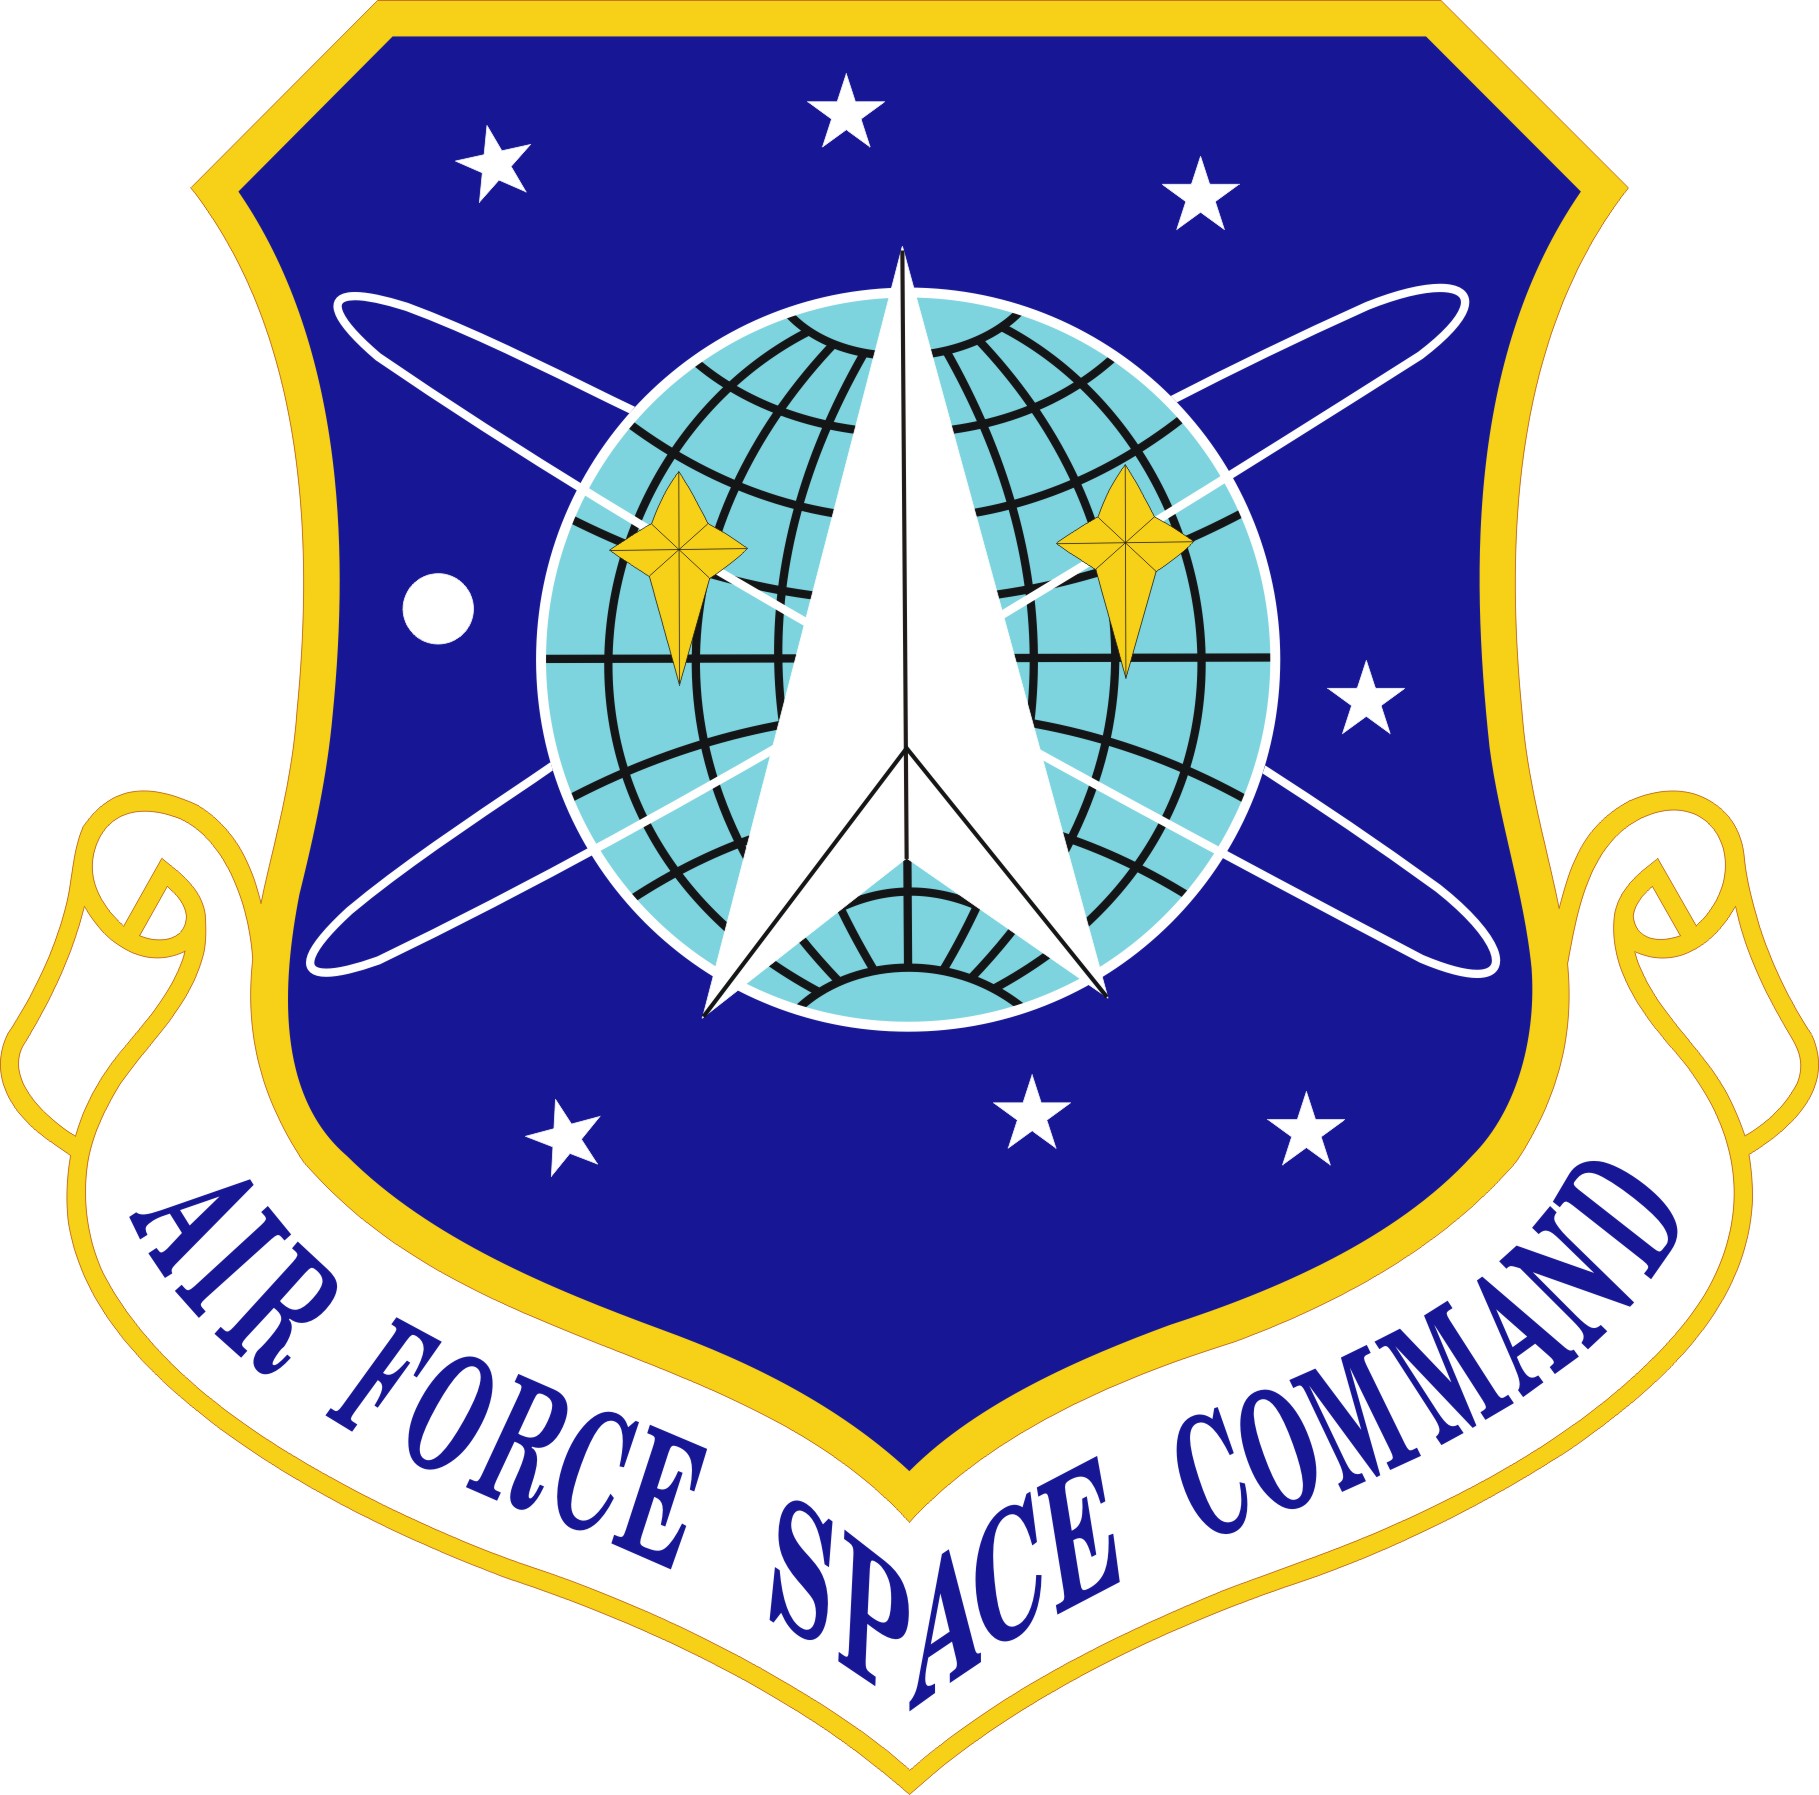 Air Force Space Command (USAF) > Air Force Historical Research Agency > Display1819 x 1795